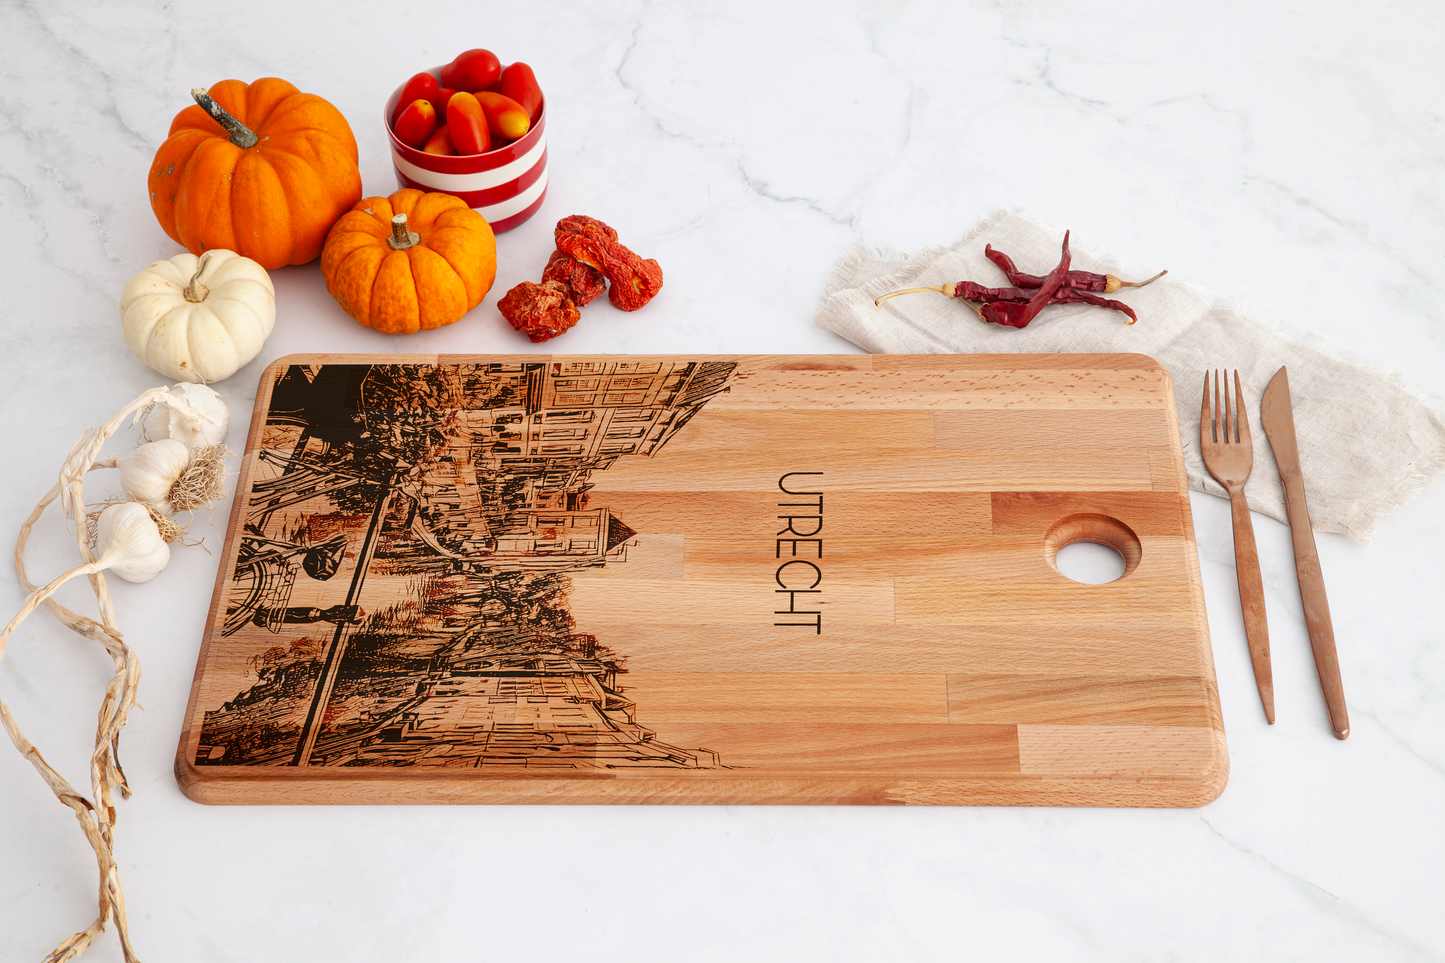 Utrecht, City View, cutting board, with knife